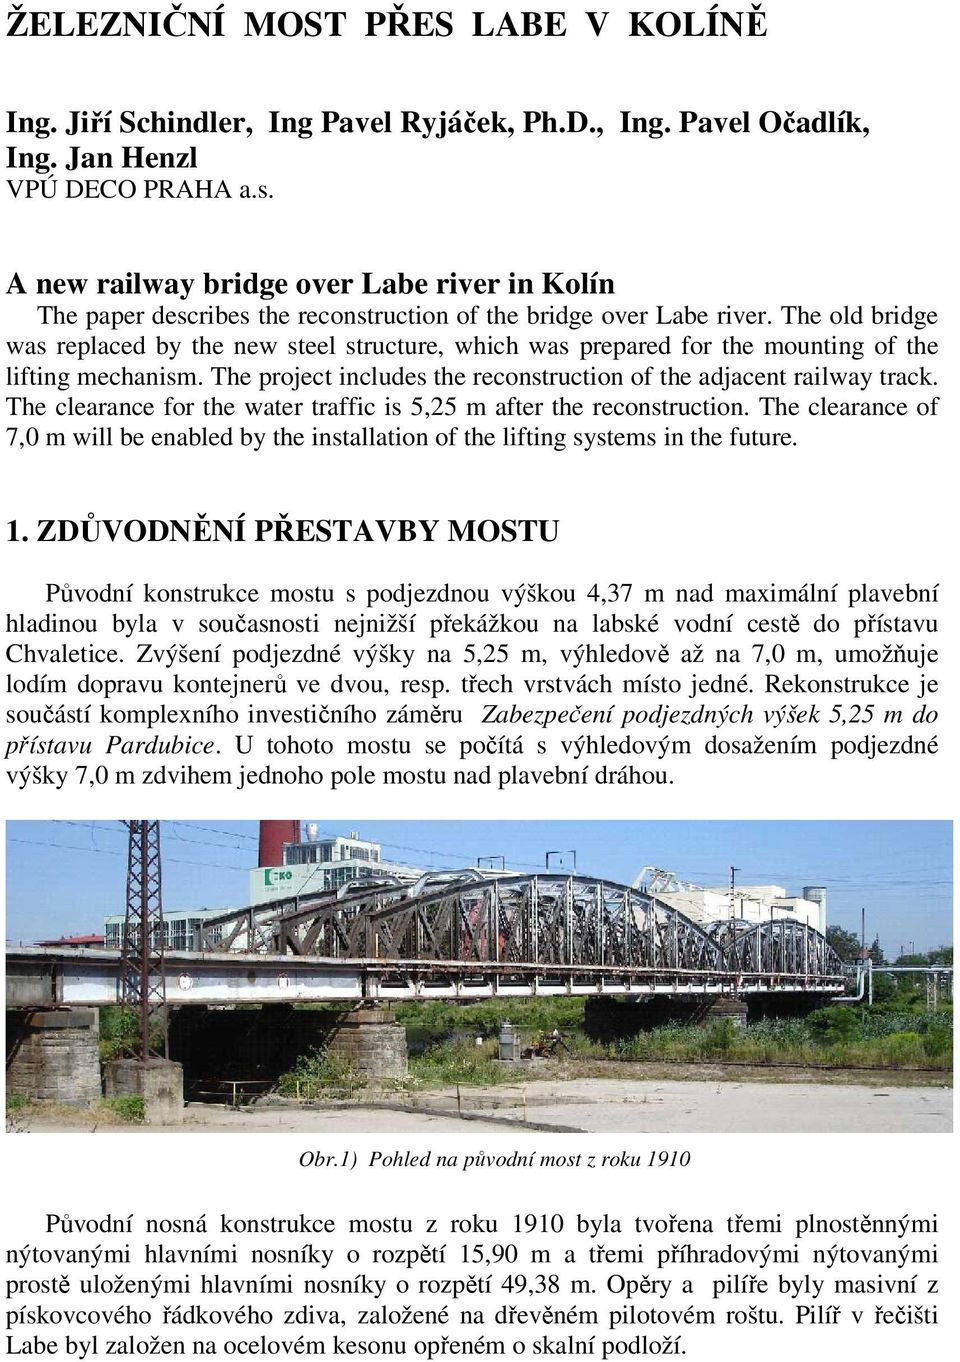 The old bridge was replaced by the new steel structure, which was prepared for the mounting of the lifting mechanism. The project includes the reconstruction of the adjacent railway track.